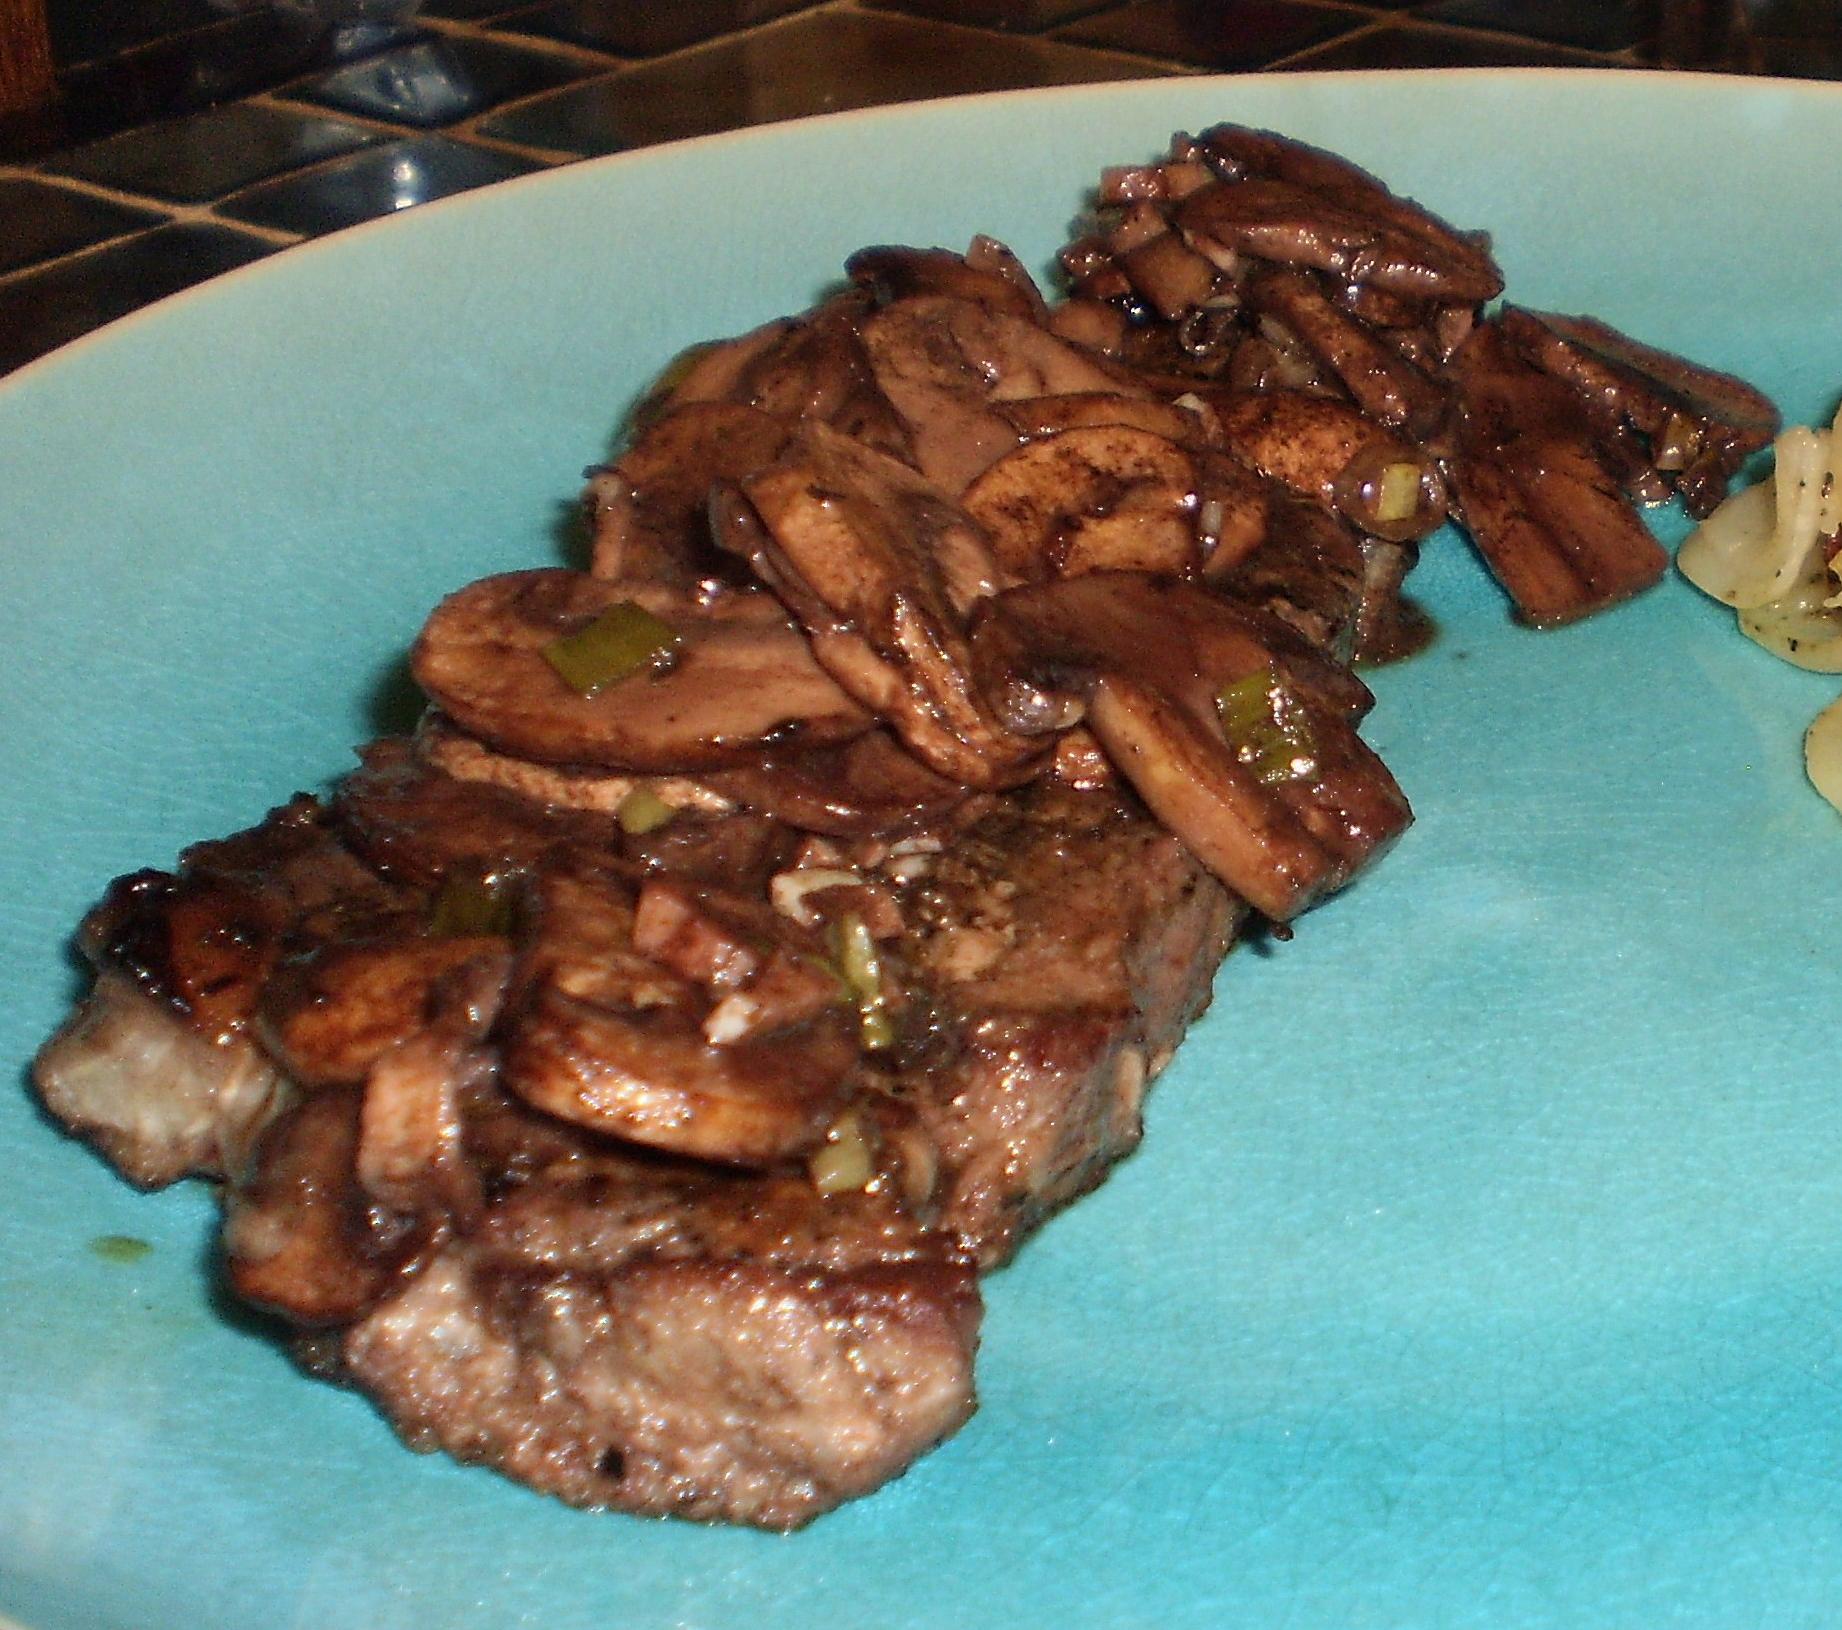  A burst of flavors in every bite of this juicy steak with a side of mushrooms cooked to perfection!